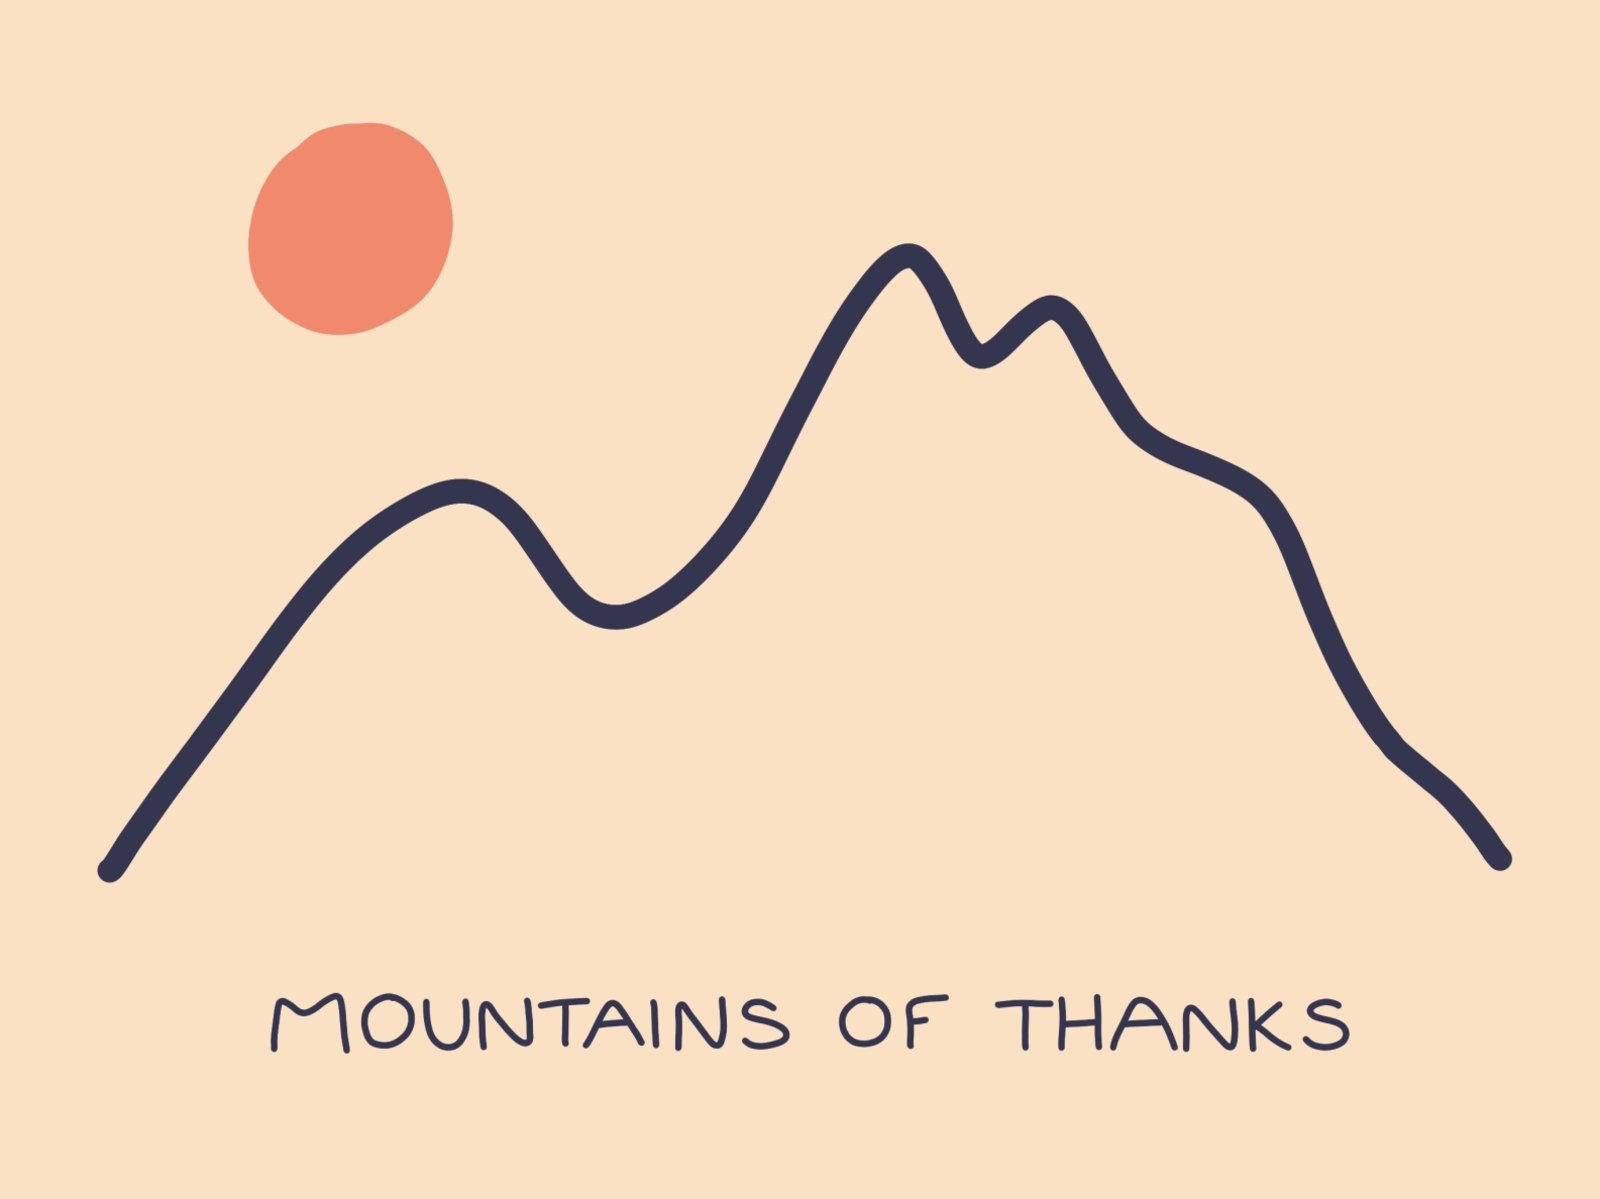 Mountains of Thanks by Francesca Mondo on Dribbble